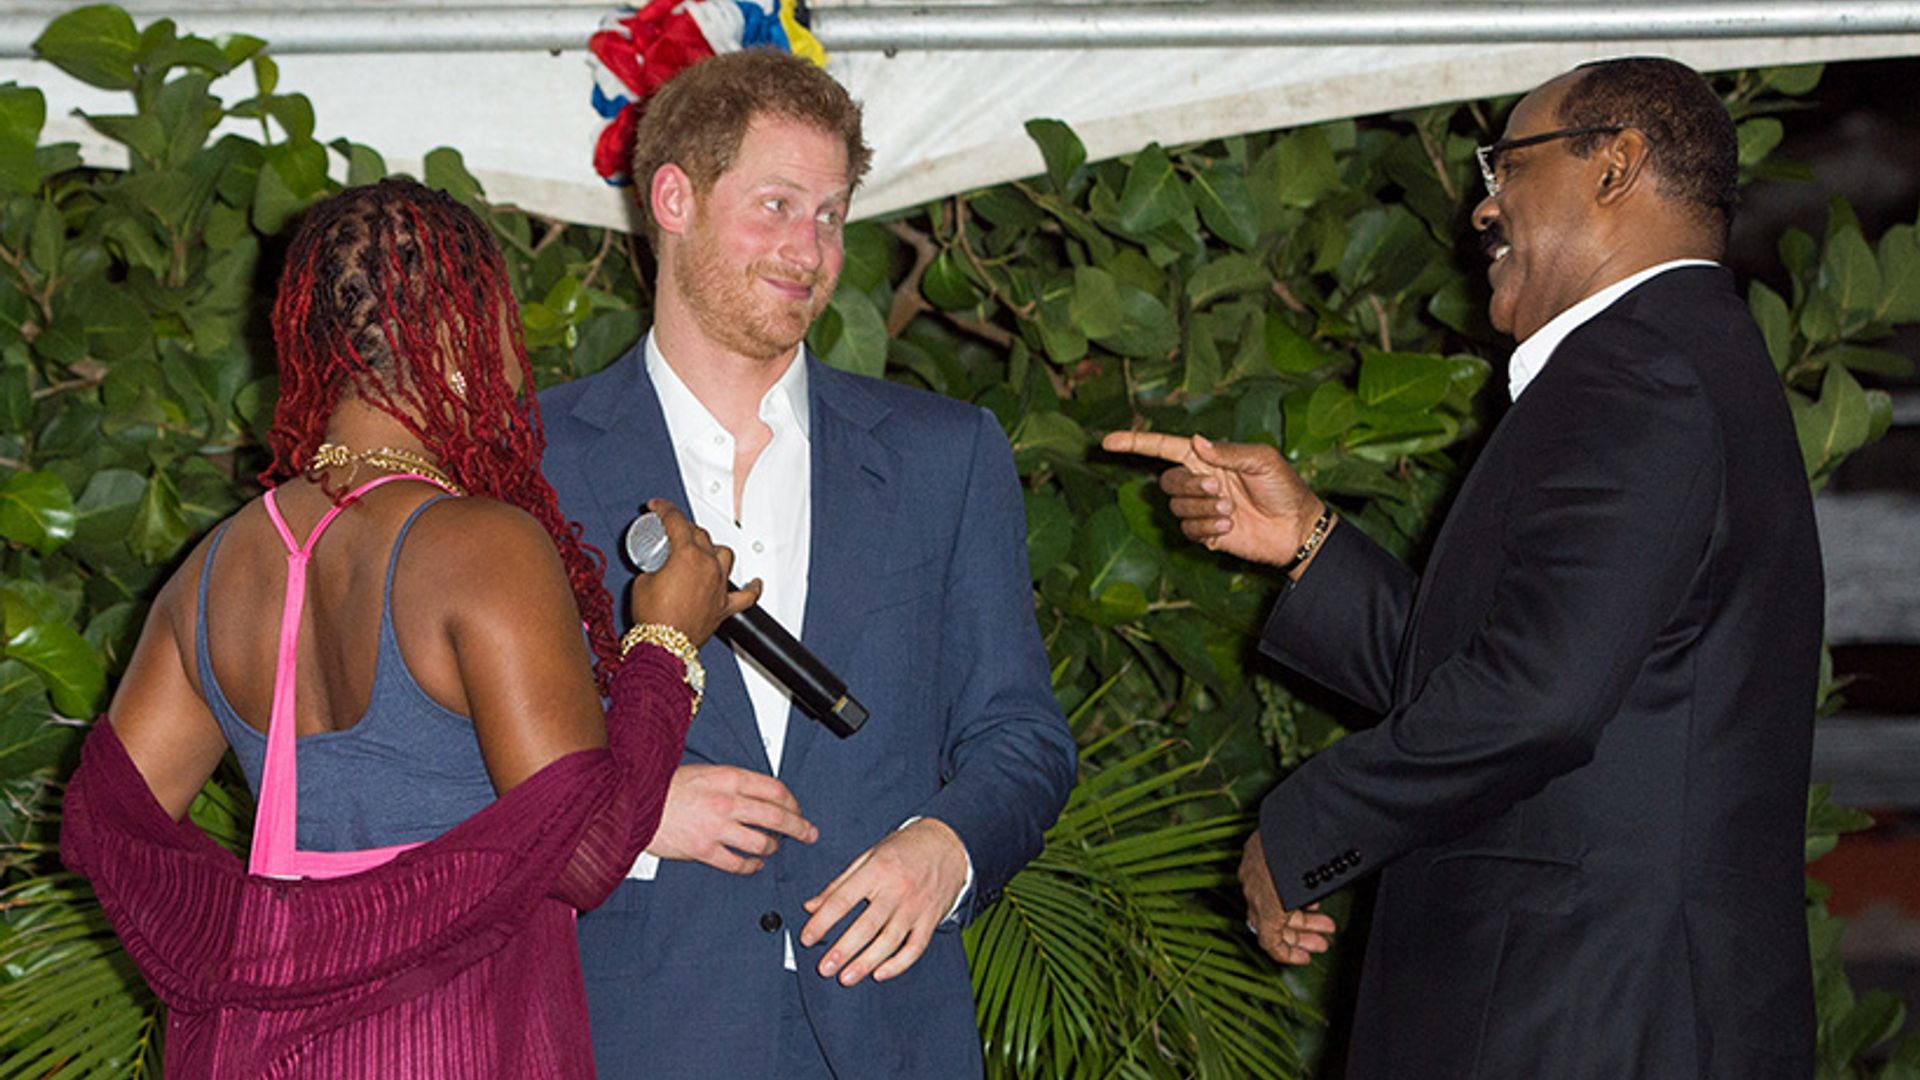 Prince Harry left red-faced as he is invited to honeymoon with Meghan Markle in Antigua